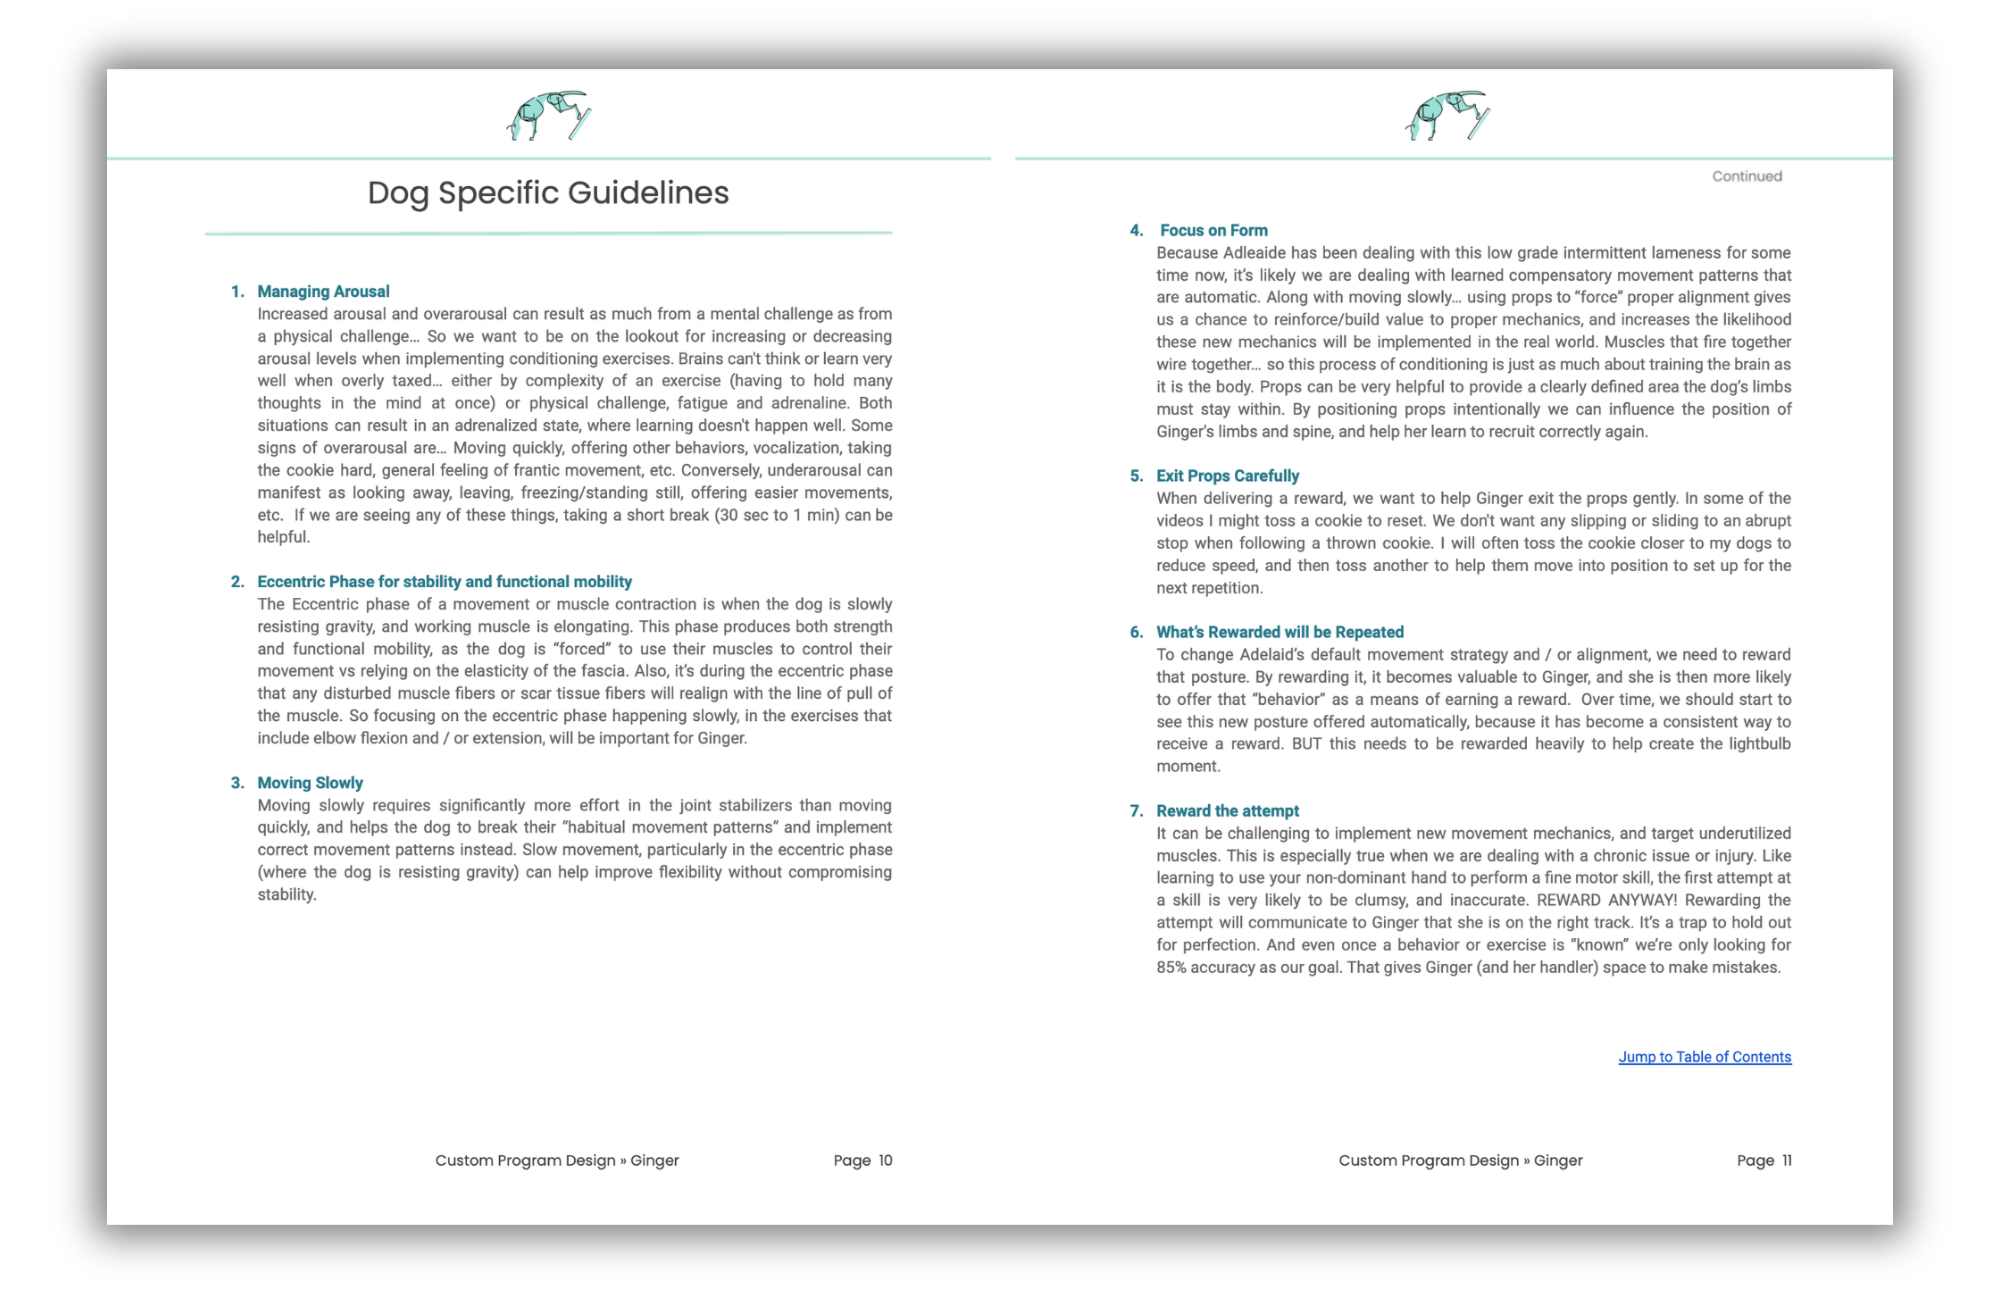 Image showing the Dog Specific Guidelines page from a Canine Conditioning Coach Custom Program.